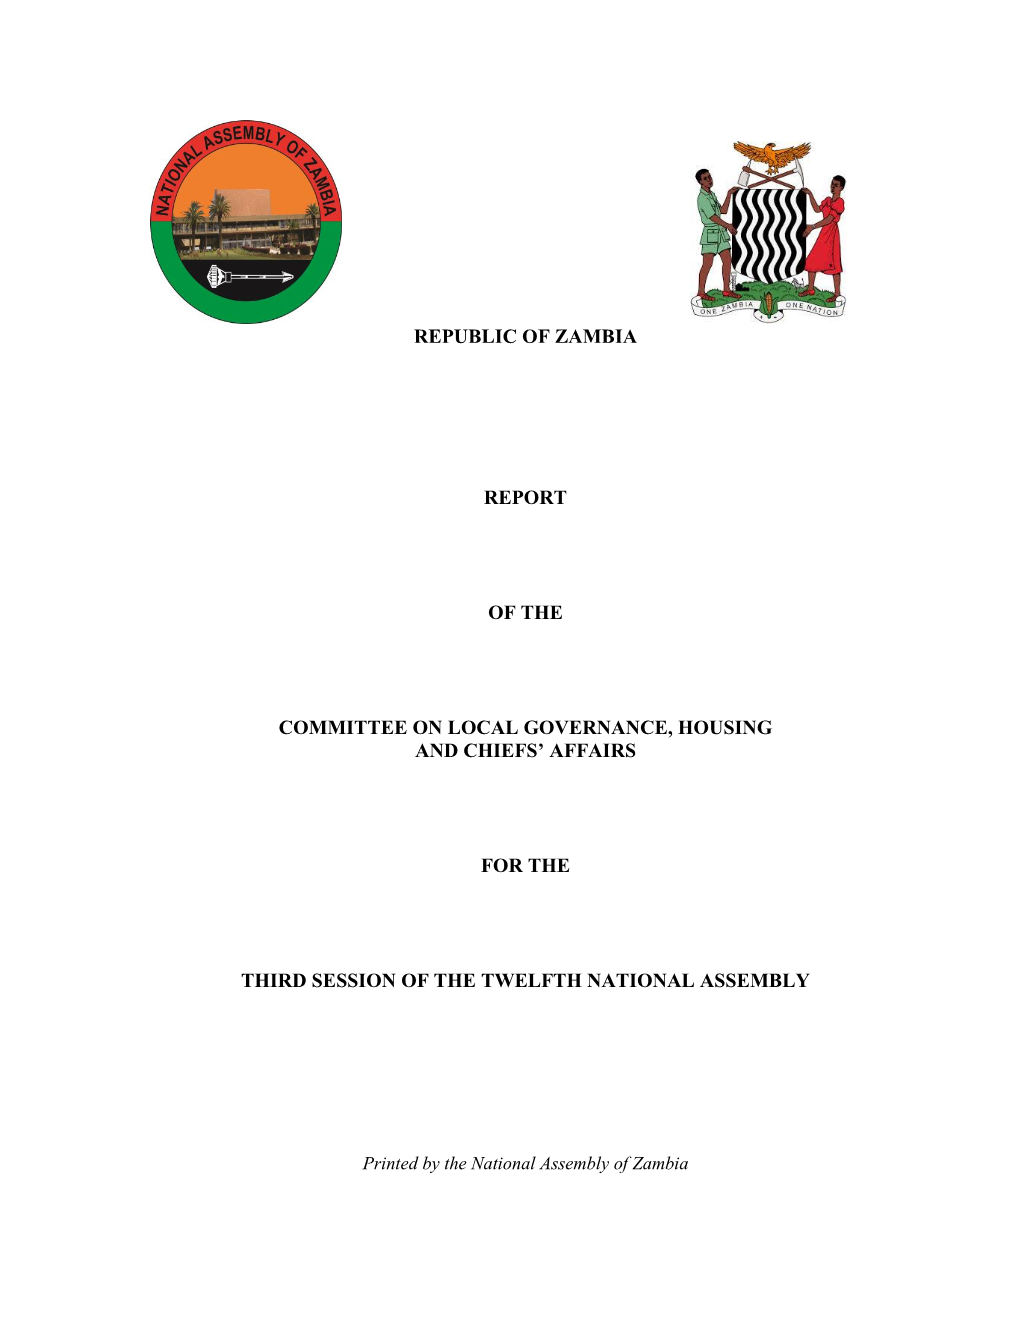 Republic of Zambia Report of the Committee on Local Governance, Housing and Chiefs' Affairs for the Third Session of the Twelf